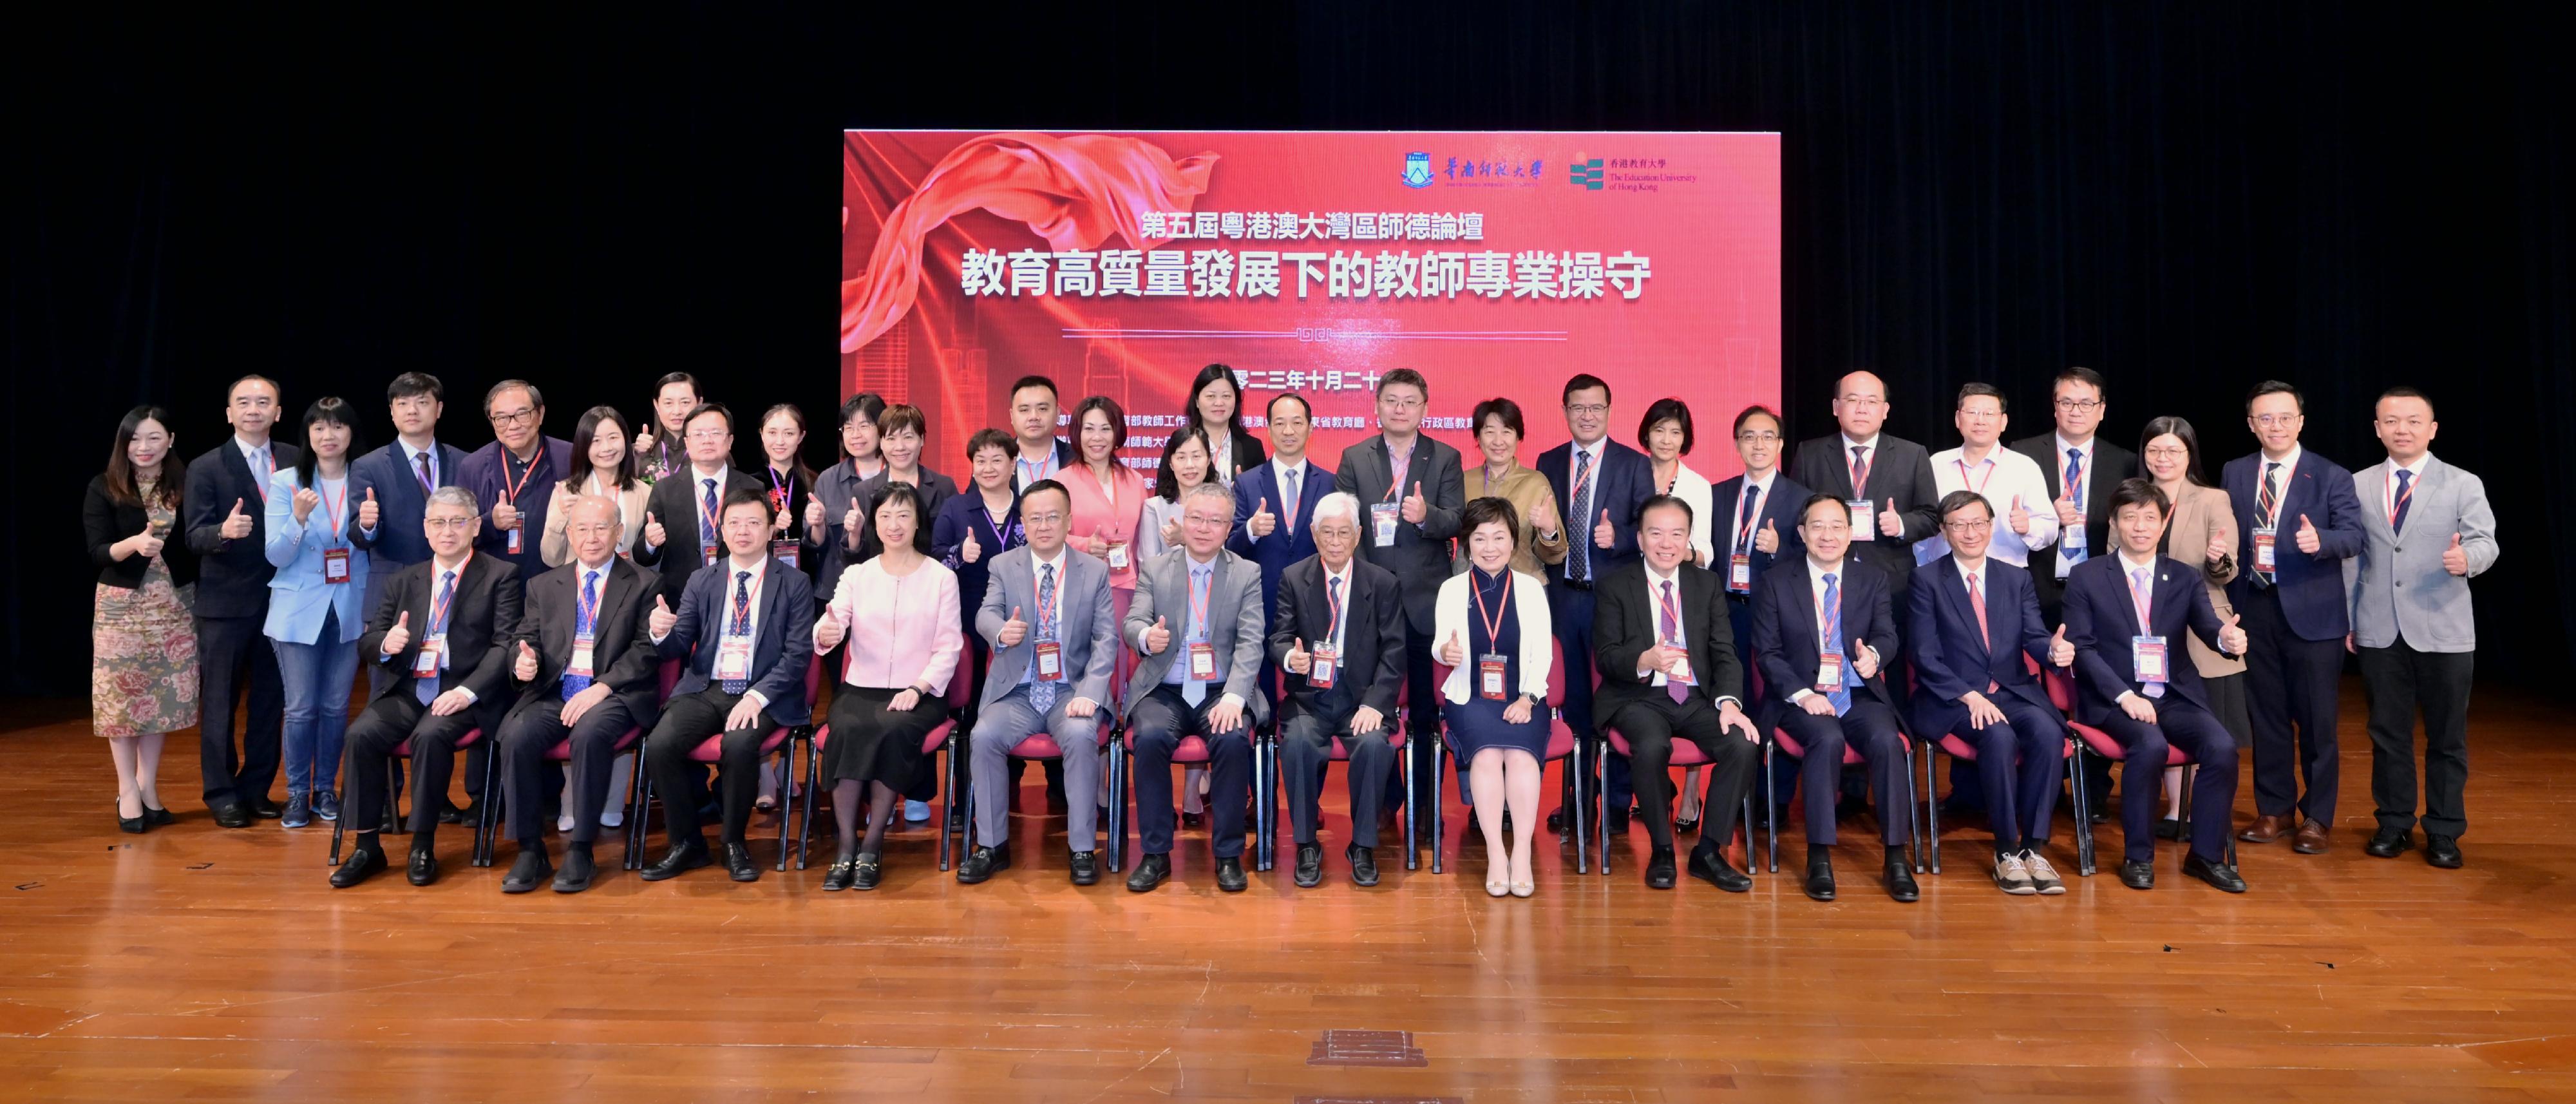 The Secretary for Education, Dr Choi Yuk-lin, attended the Fifth Greater Bay Area Forum on Teachers' Professional Ethics today (October 21). Photo shows Dr Choi (first row, fifth right) with the Director of the Department of Teacher Education of the Ministry of Education, Dr Ren Youqun (first row, sixth left); Distinguished Professor of Beijing Normal University and Emeritus President of the Chinese Society of Education, Professor Gu Mingyuan (first row, sixth right); Deputy Director-General of the Department of Education of Guangdong Province Mr Zhu Jianhua (first row, fifth left); the Secretary of the Communist Party of China at South China Normal University Committee, Dr Wang Binwei (first row, third right); the Permanent Secretary for Education, Ms Michelle Li (first row, fourth left); and the Chairman of the Council of the Education University of Hong Kong, Dr David Wong (first row, fourth right).